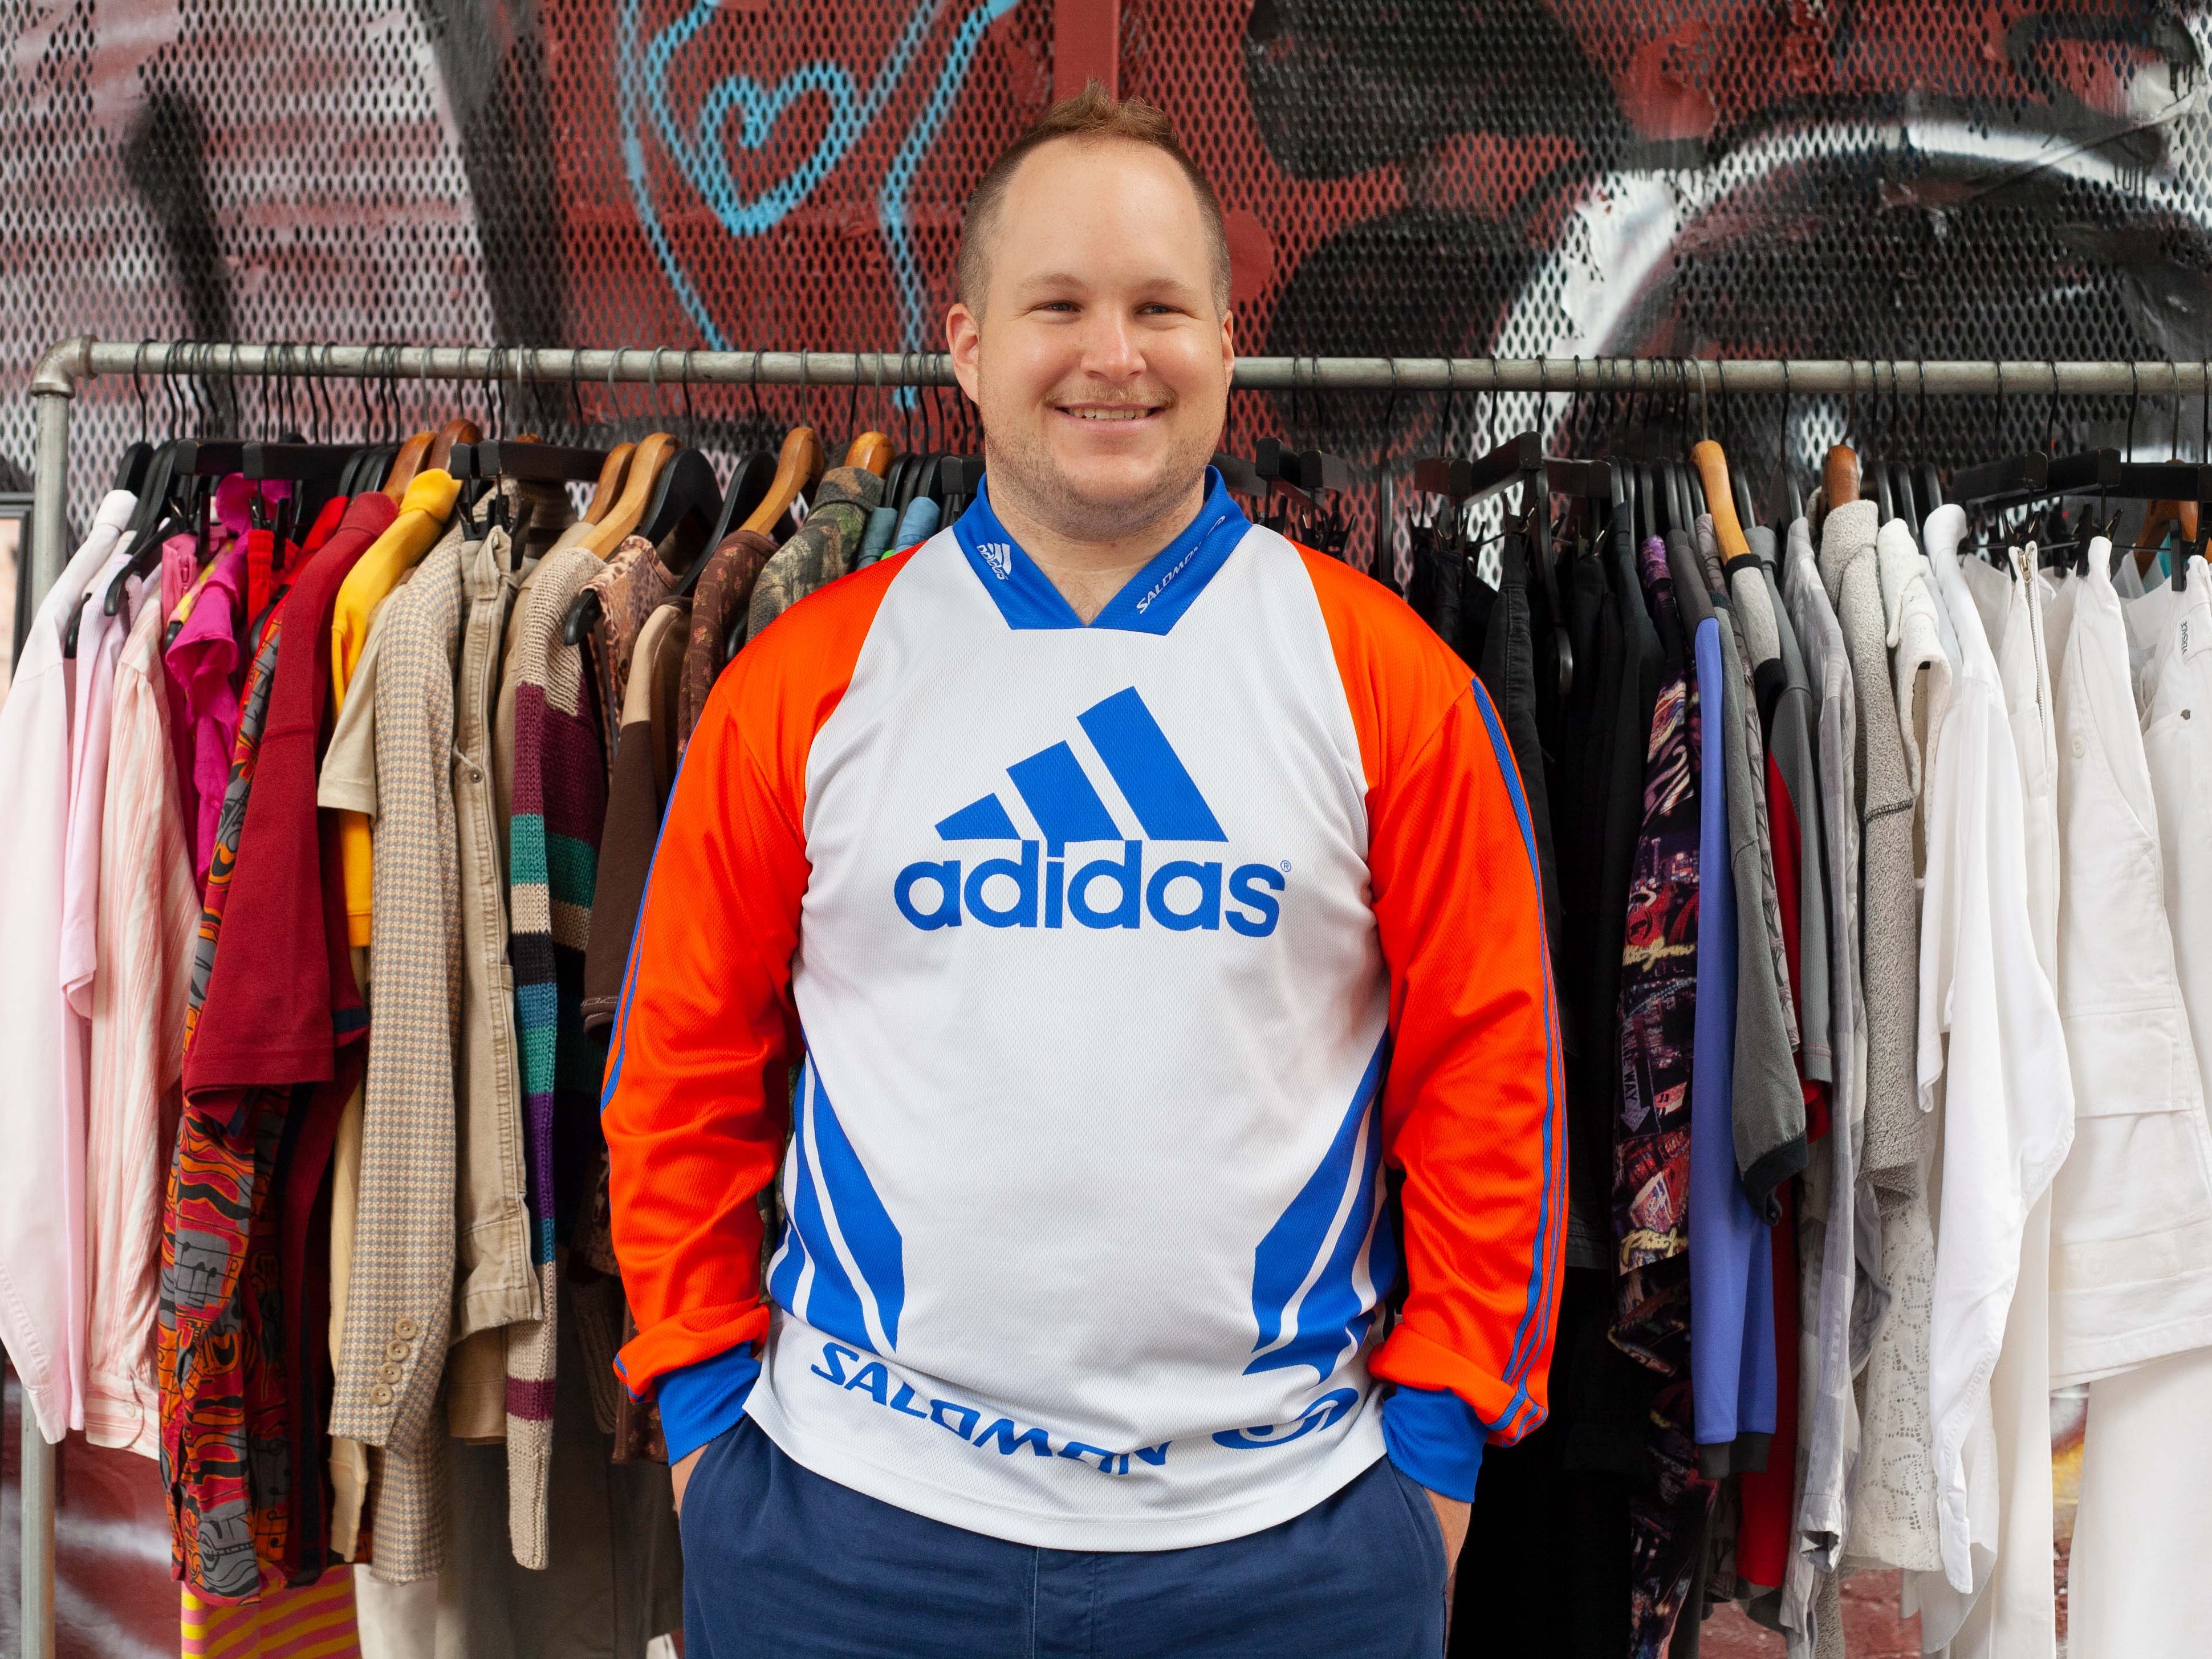 Meet the Vintage Dealer Wheeling His Store Through the Streets of New York